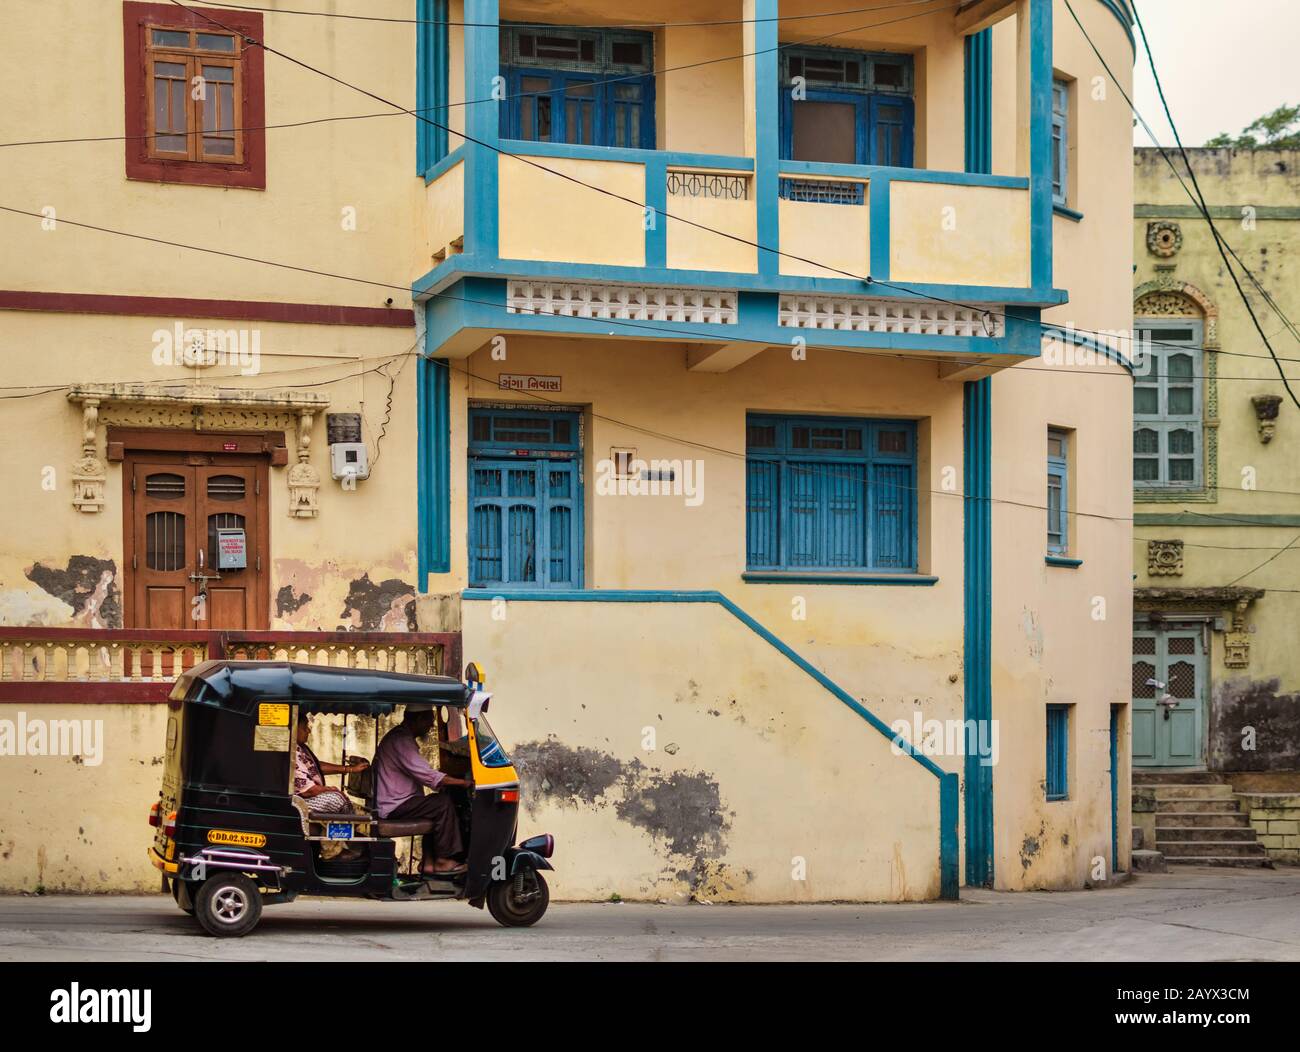 A quiet neighbourhood of old residential buildings with blue and brown windows in Diu. A rickshaw rides on the road. Stock Photo